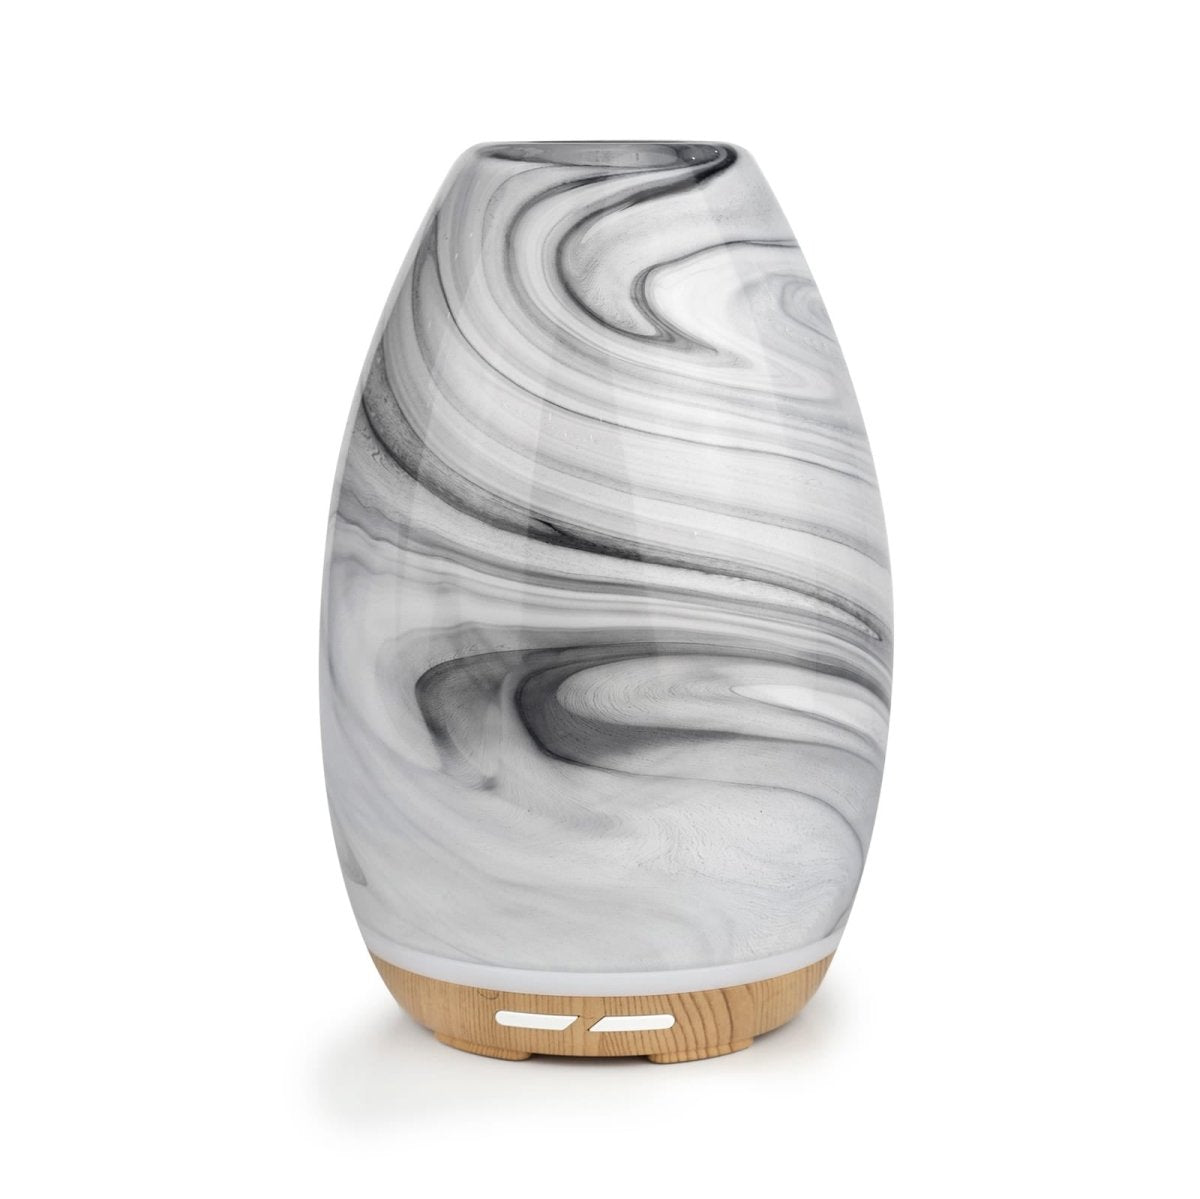 Aroma Swirl Diffuser - Black | Lively Living | Vaporisers, Diffuser & Oils | Thirty 16 Williamstown